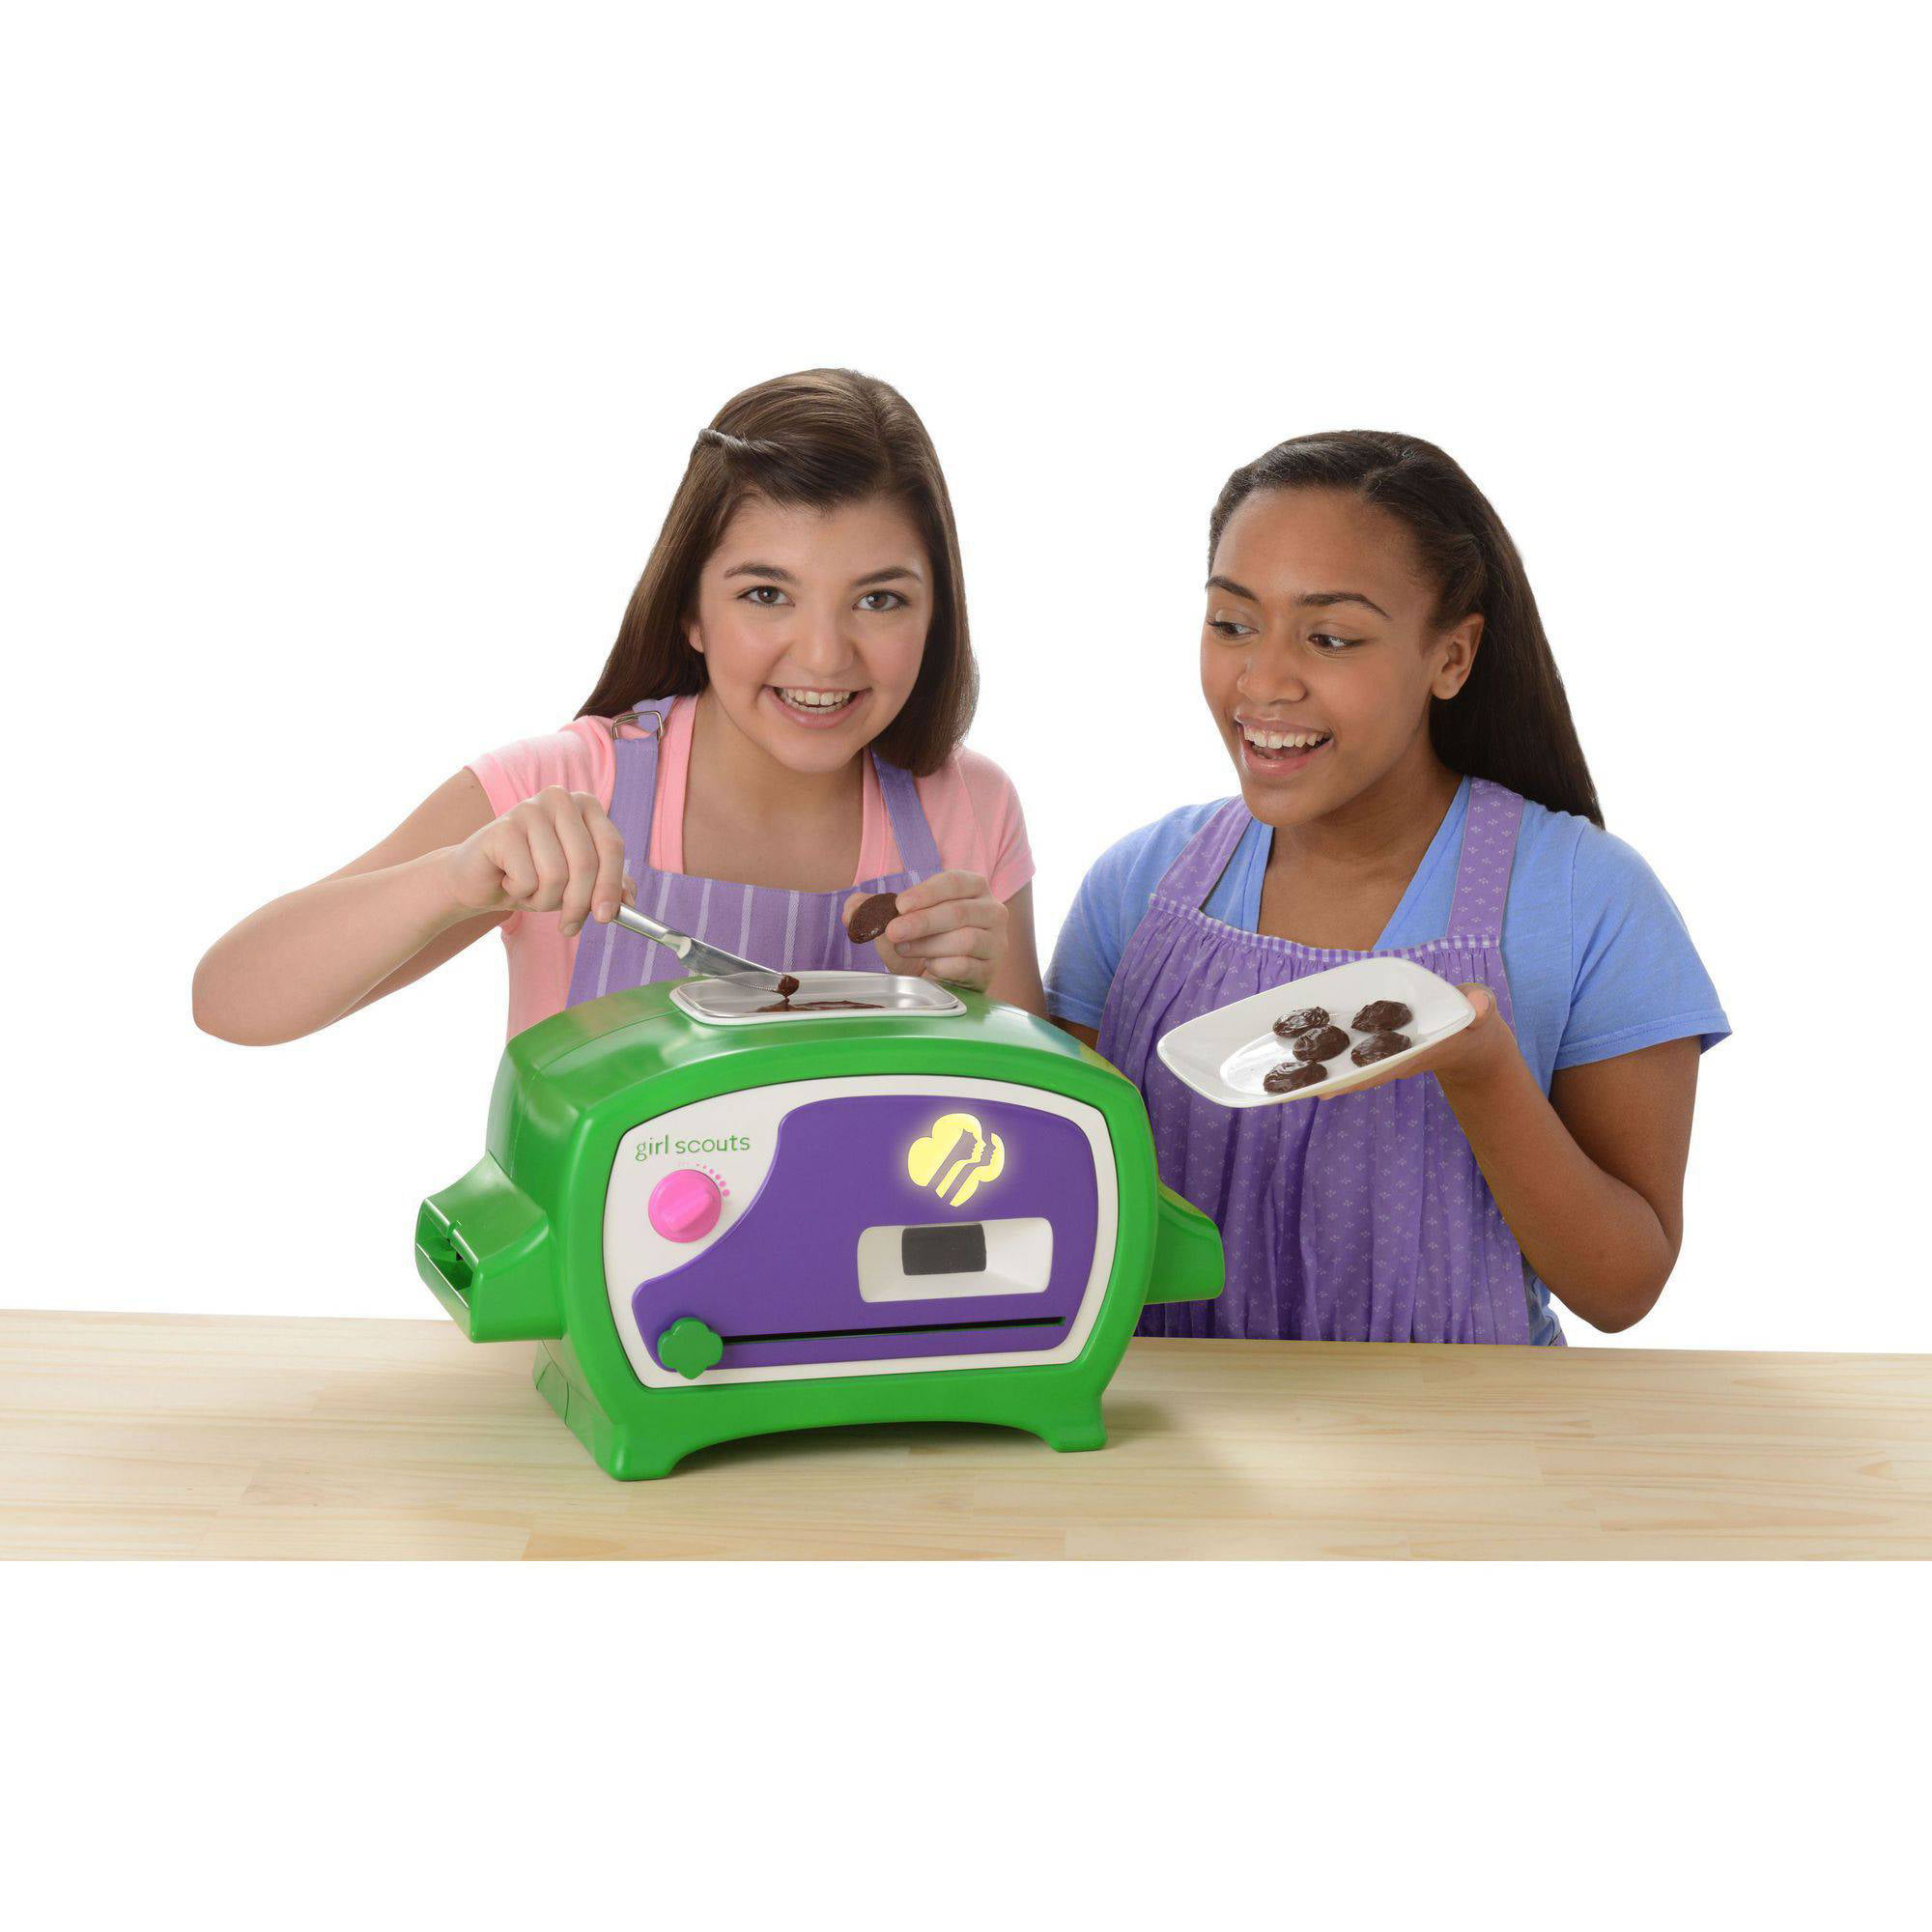 NWOB Girl Scouts Electric Cookie Oven 